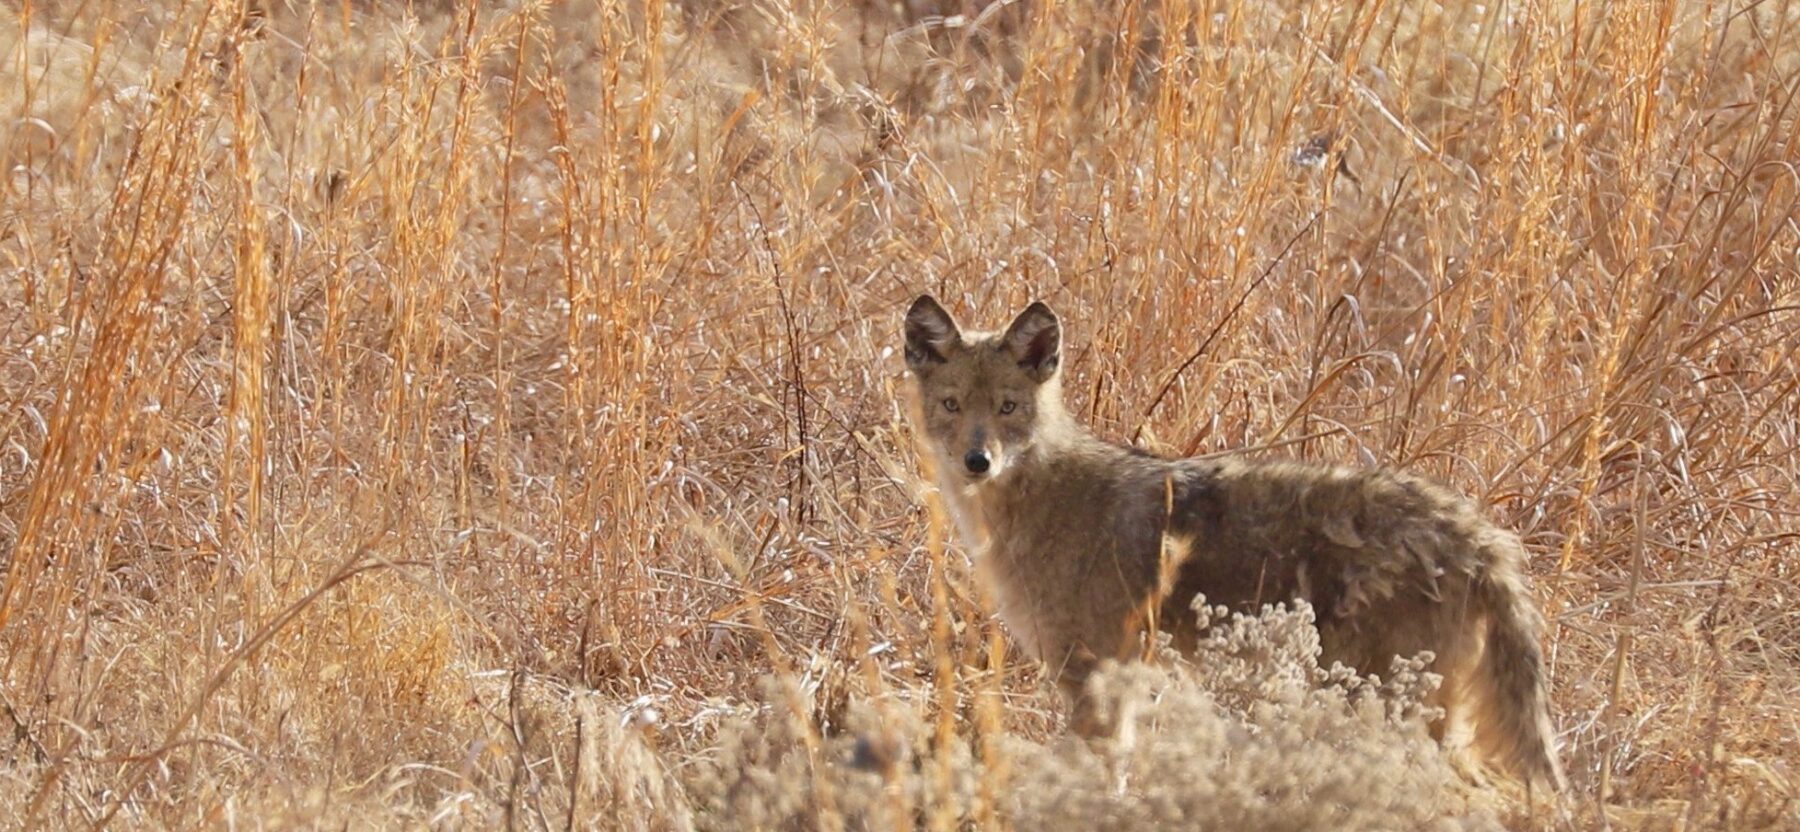 Coyote standing in a meadow